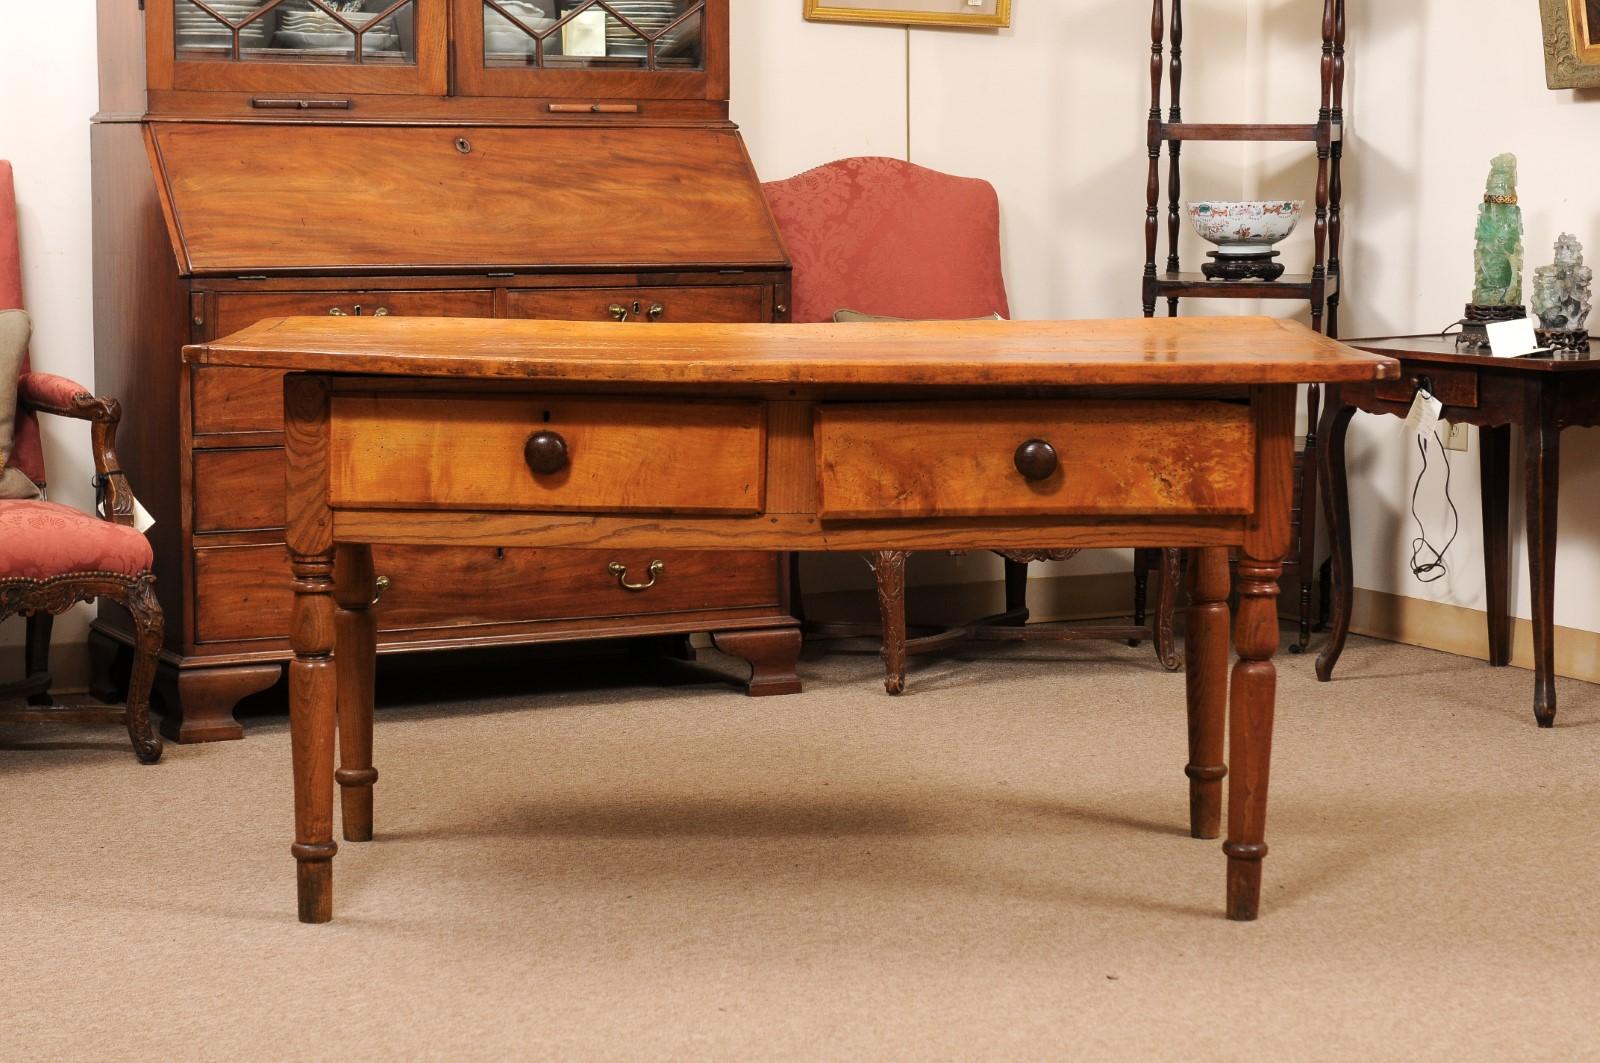 Large American Pine Kitchen Table with 2 Deep Drawers and Turned Legs, c1890 For Sale 8